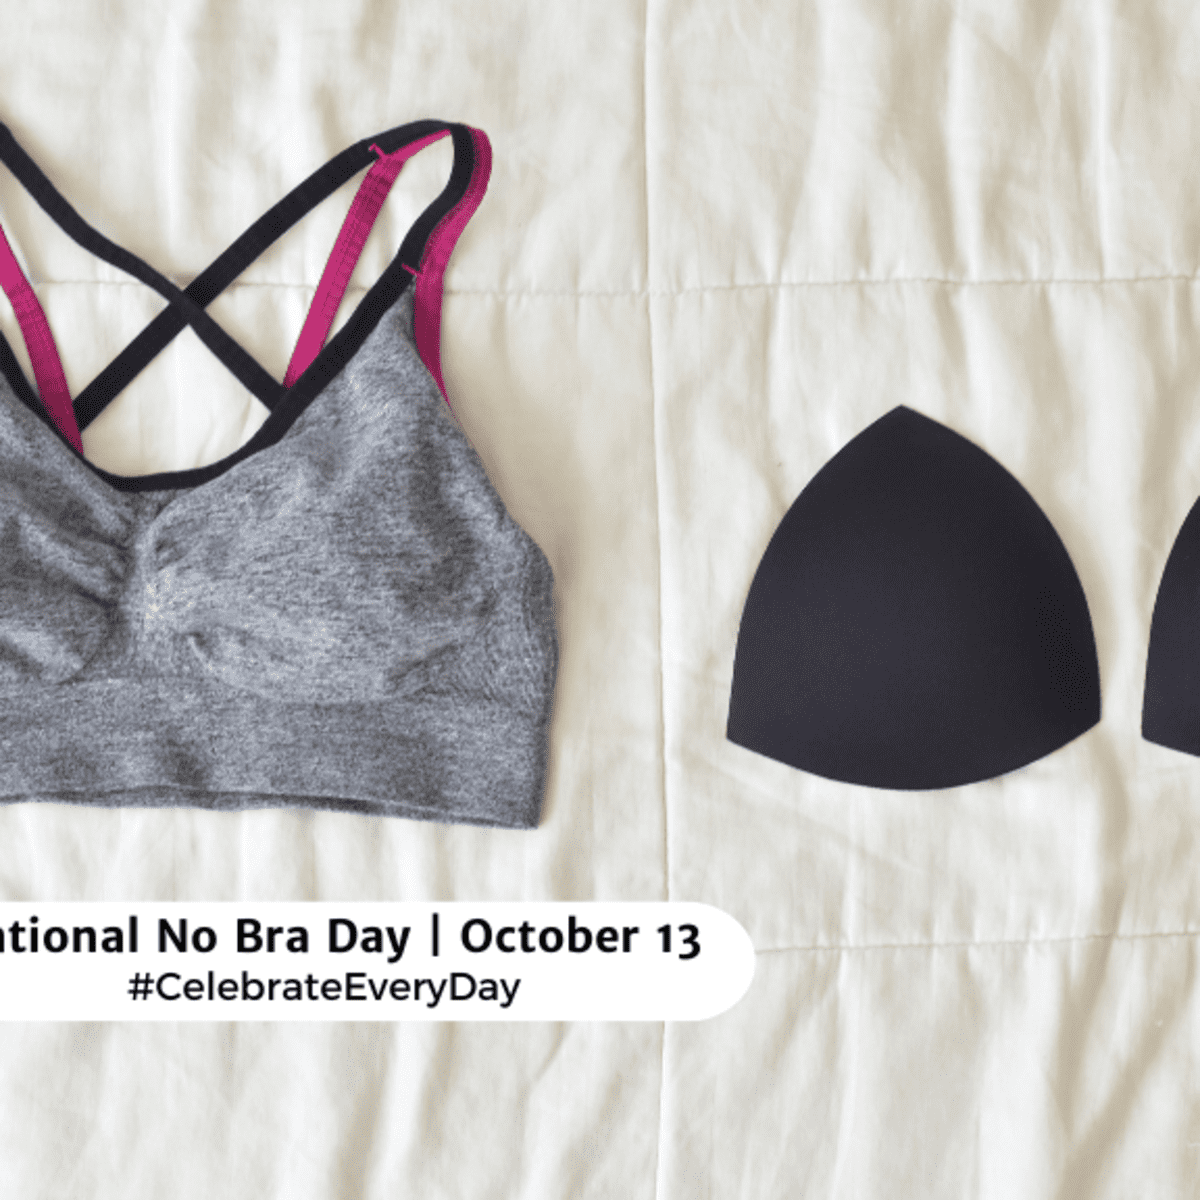 National No Bra Day: When is it and what is it for? – Metro US